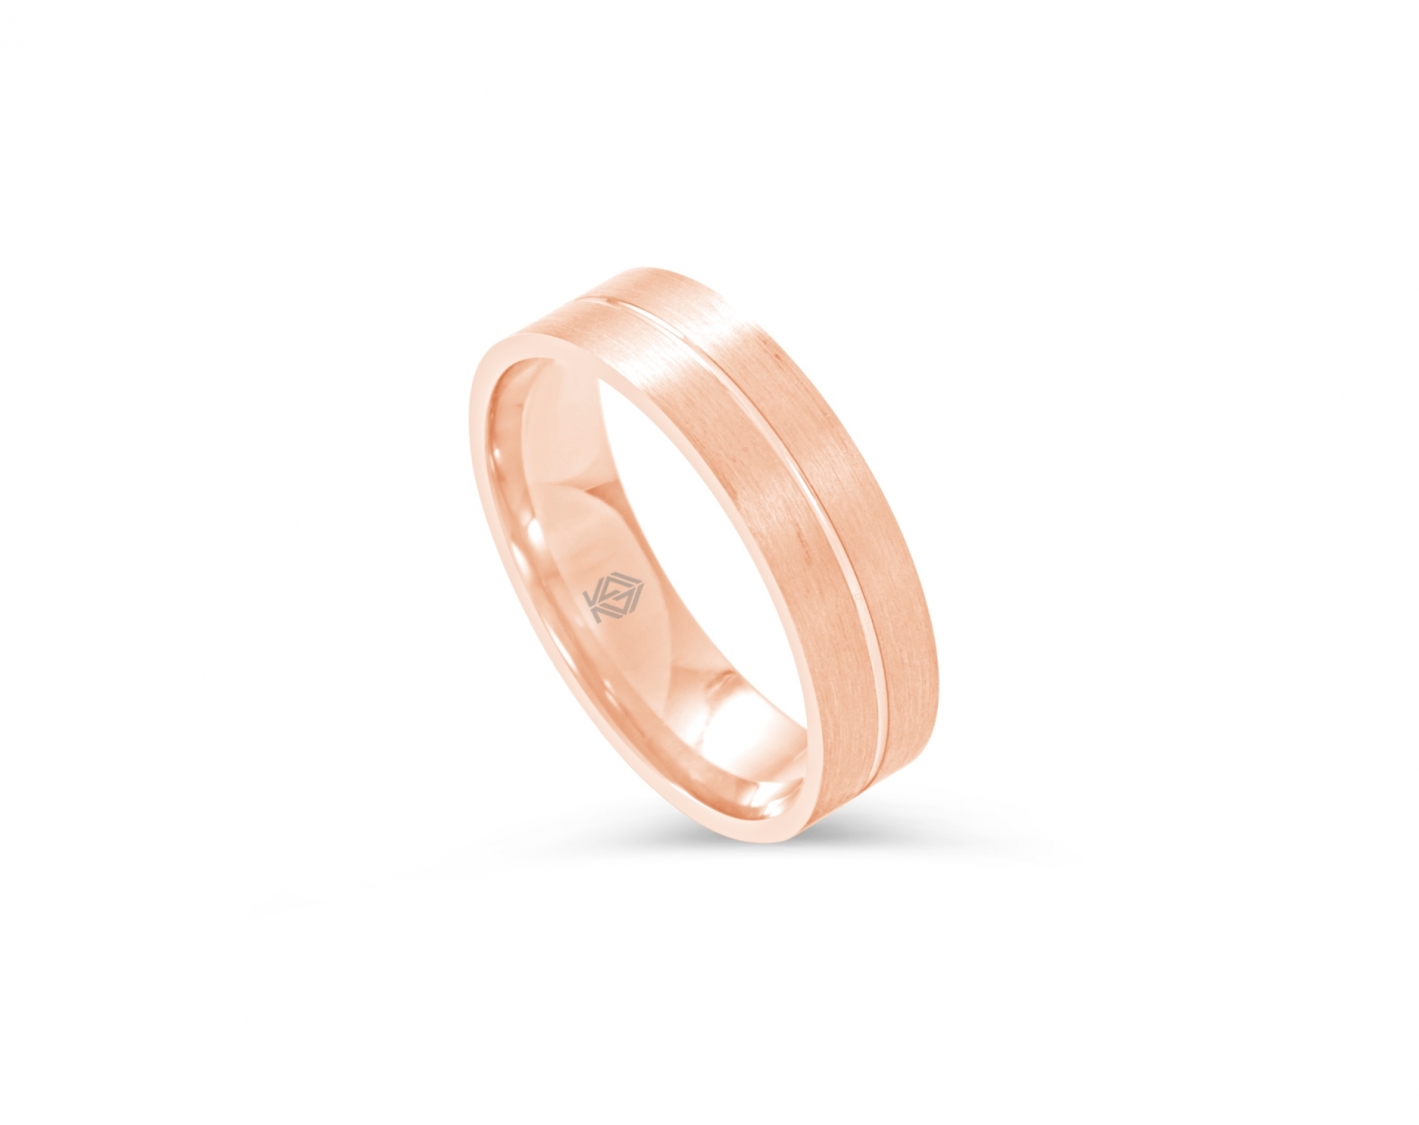 18k rose gold 6mm matte wedding band with a shiny inlay Photos & images